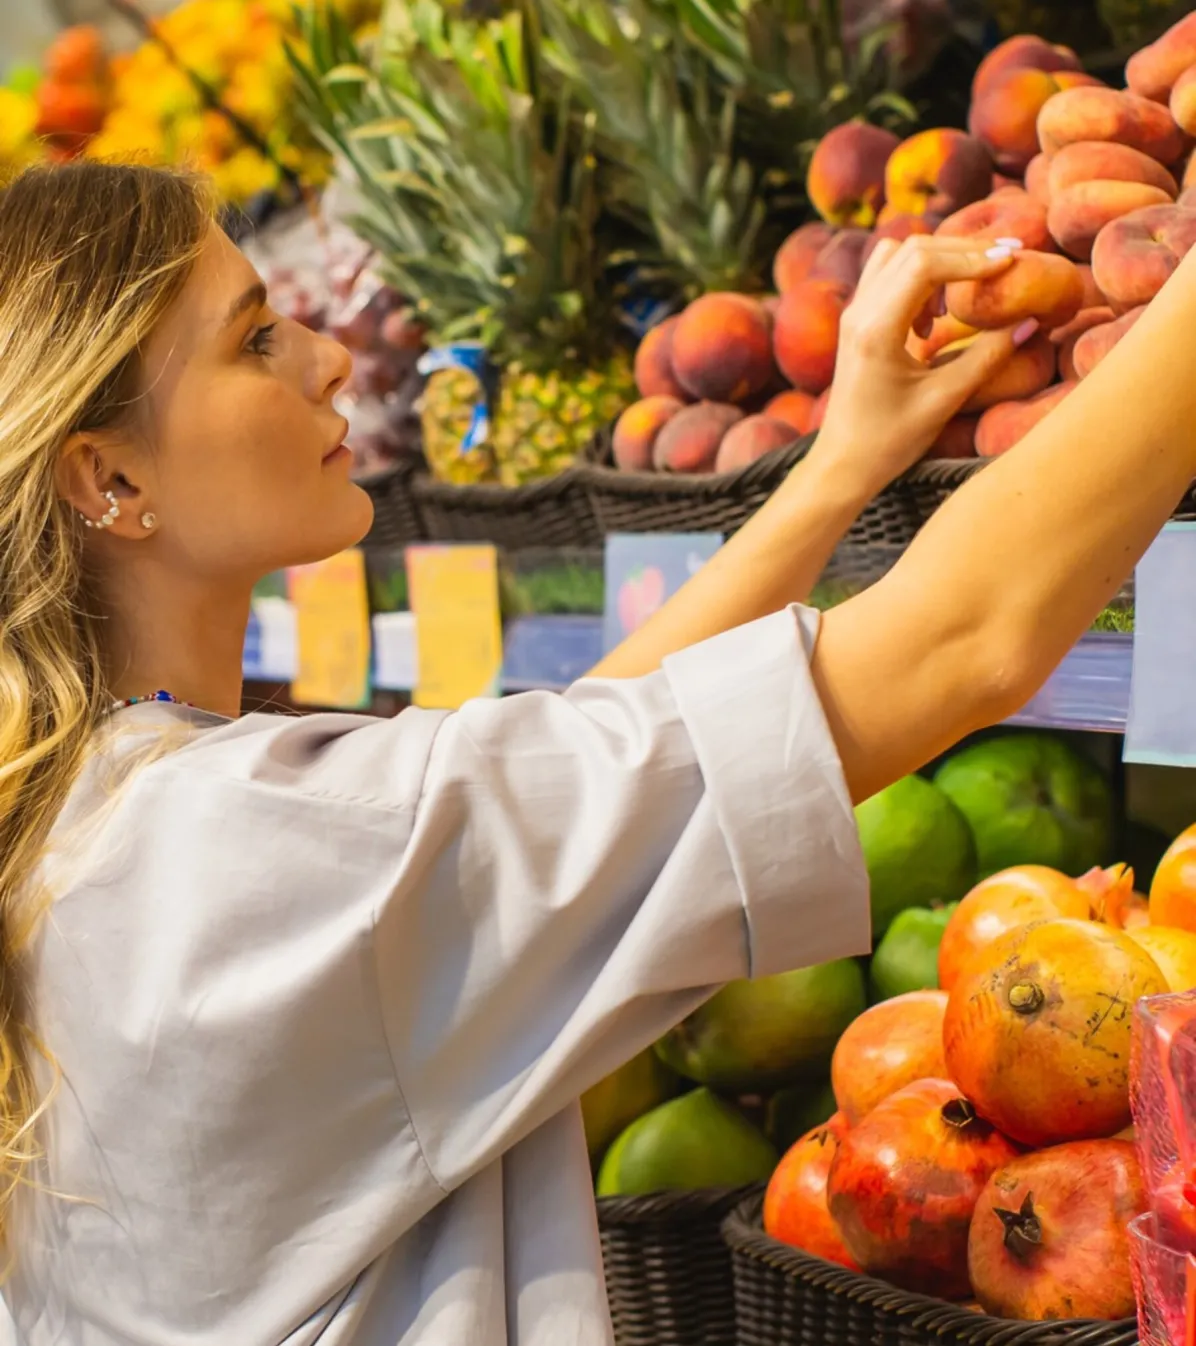 Young woman reaching for produce in grocery store